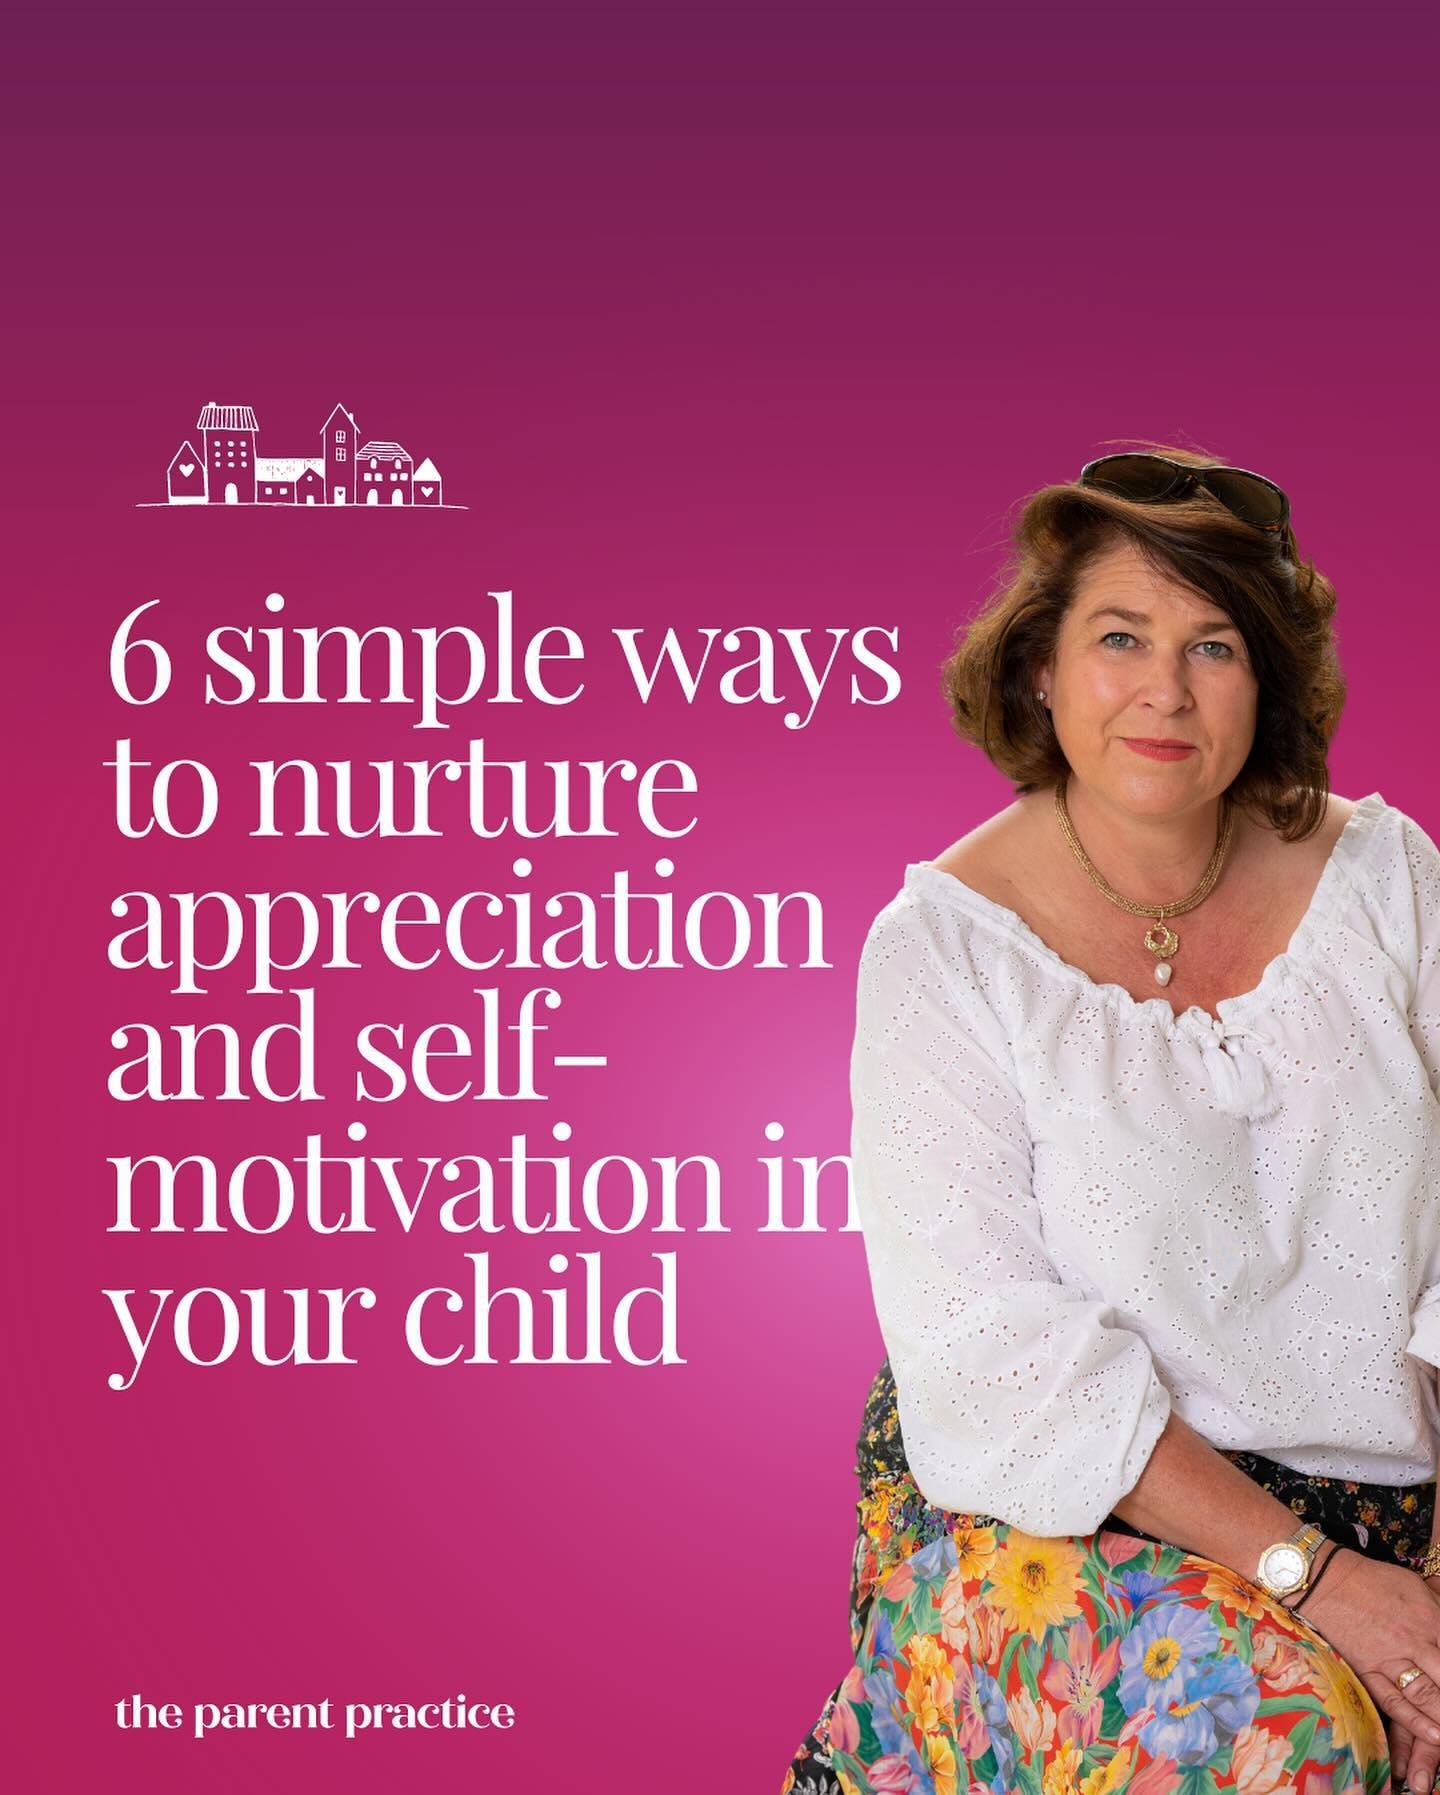 Foster appreciation and intrinsic motivation in your child with these simple strategies! 

Celebrate their effort, offer descriptive praise, and get creative with non-material rewards like quality time together.

Prioritise presence over presents and